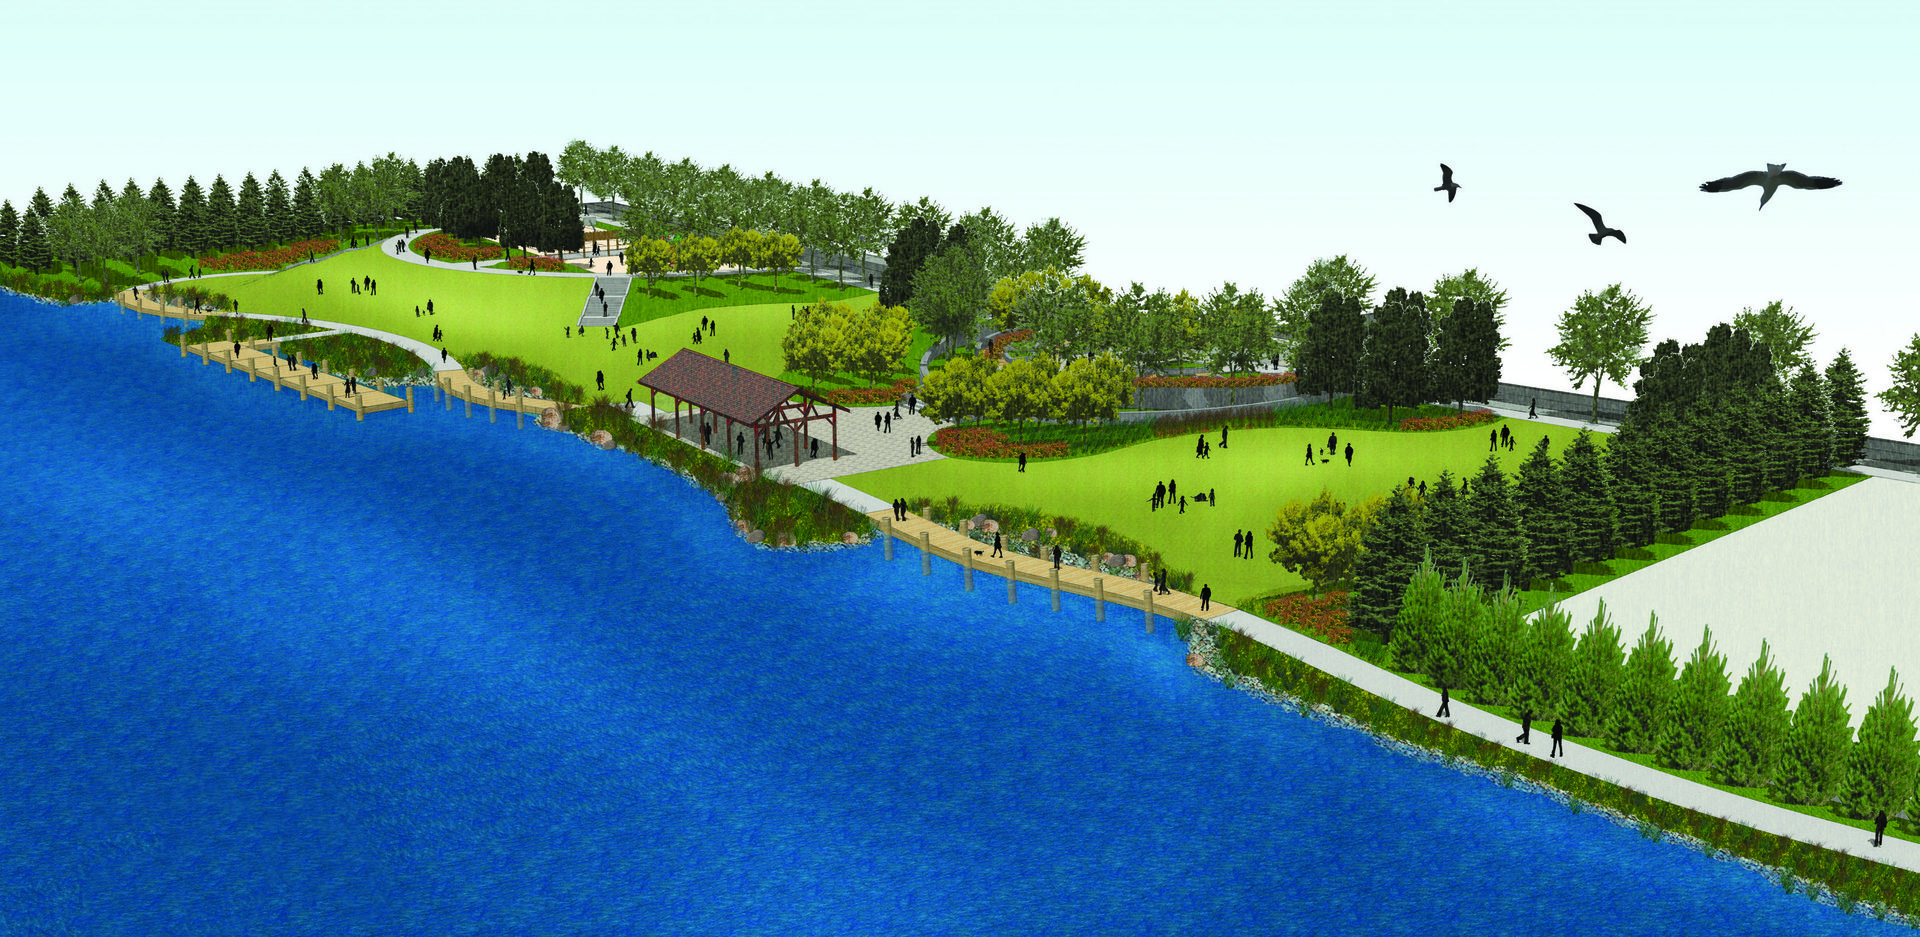 New plazas, gently sloping open lawn areas and an overlook pavilion allow for a diverse range of uses and activities.